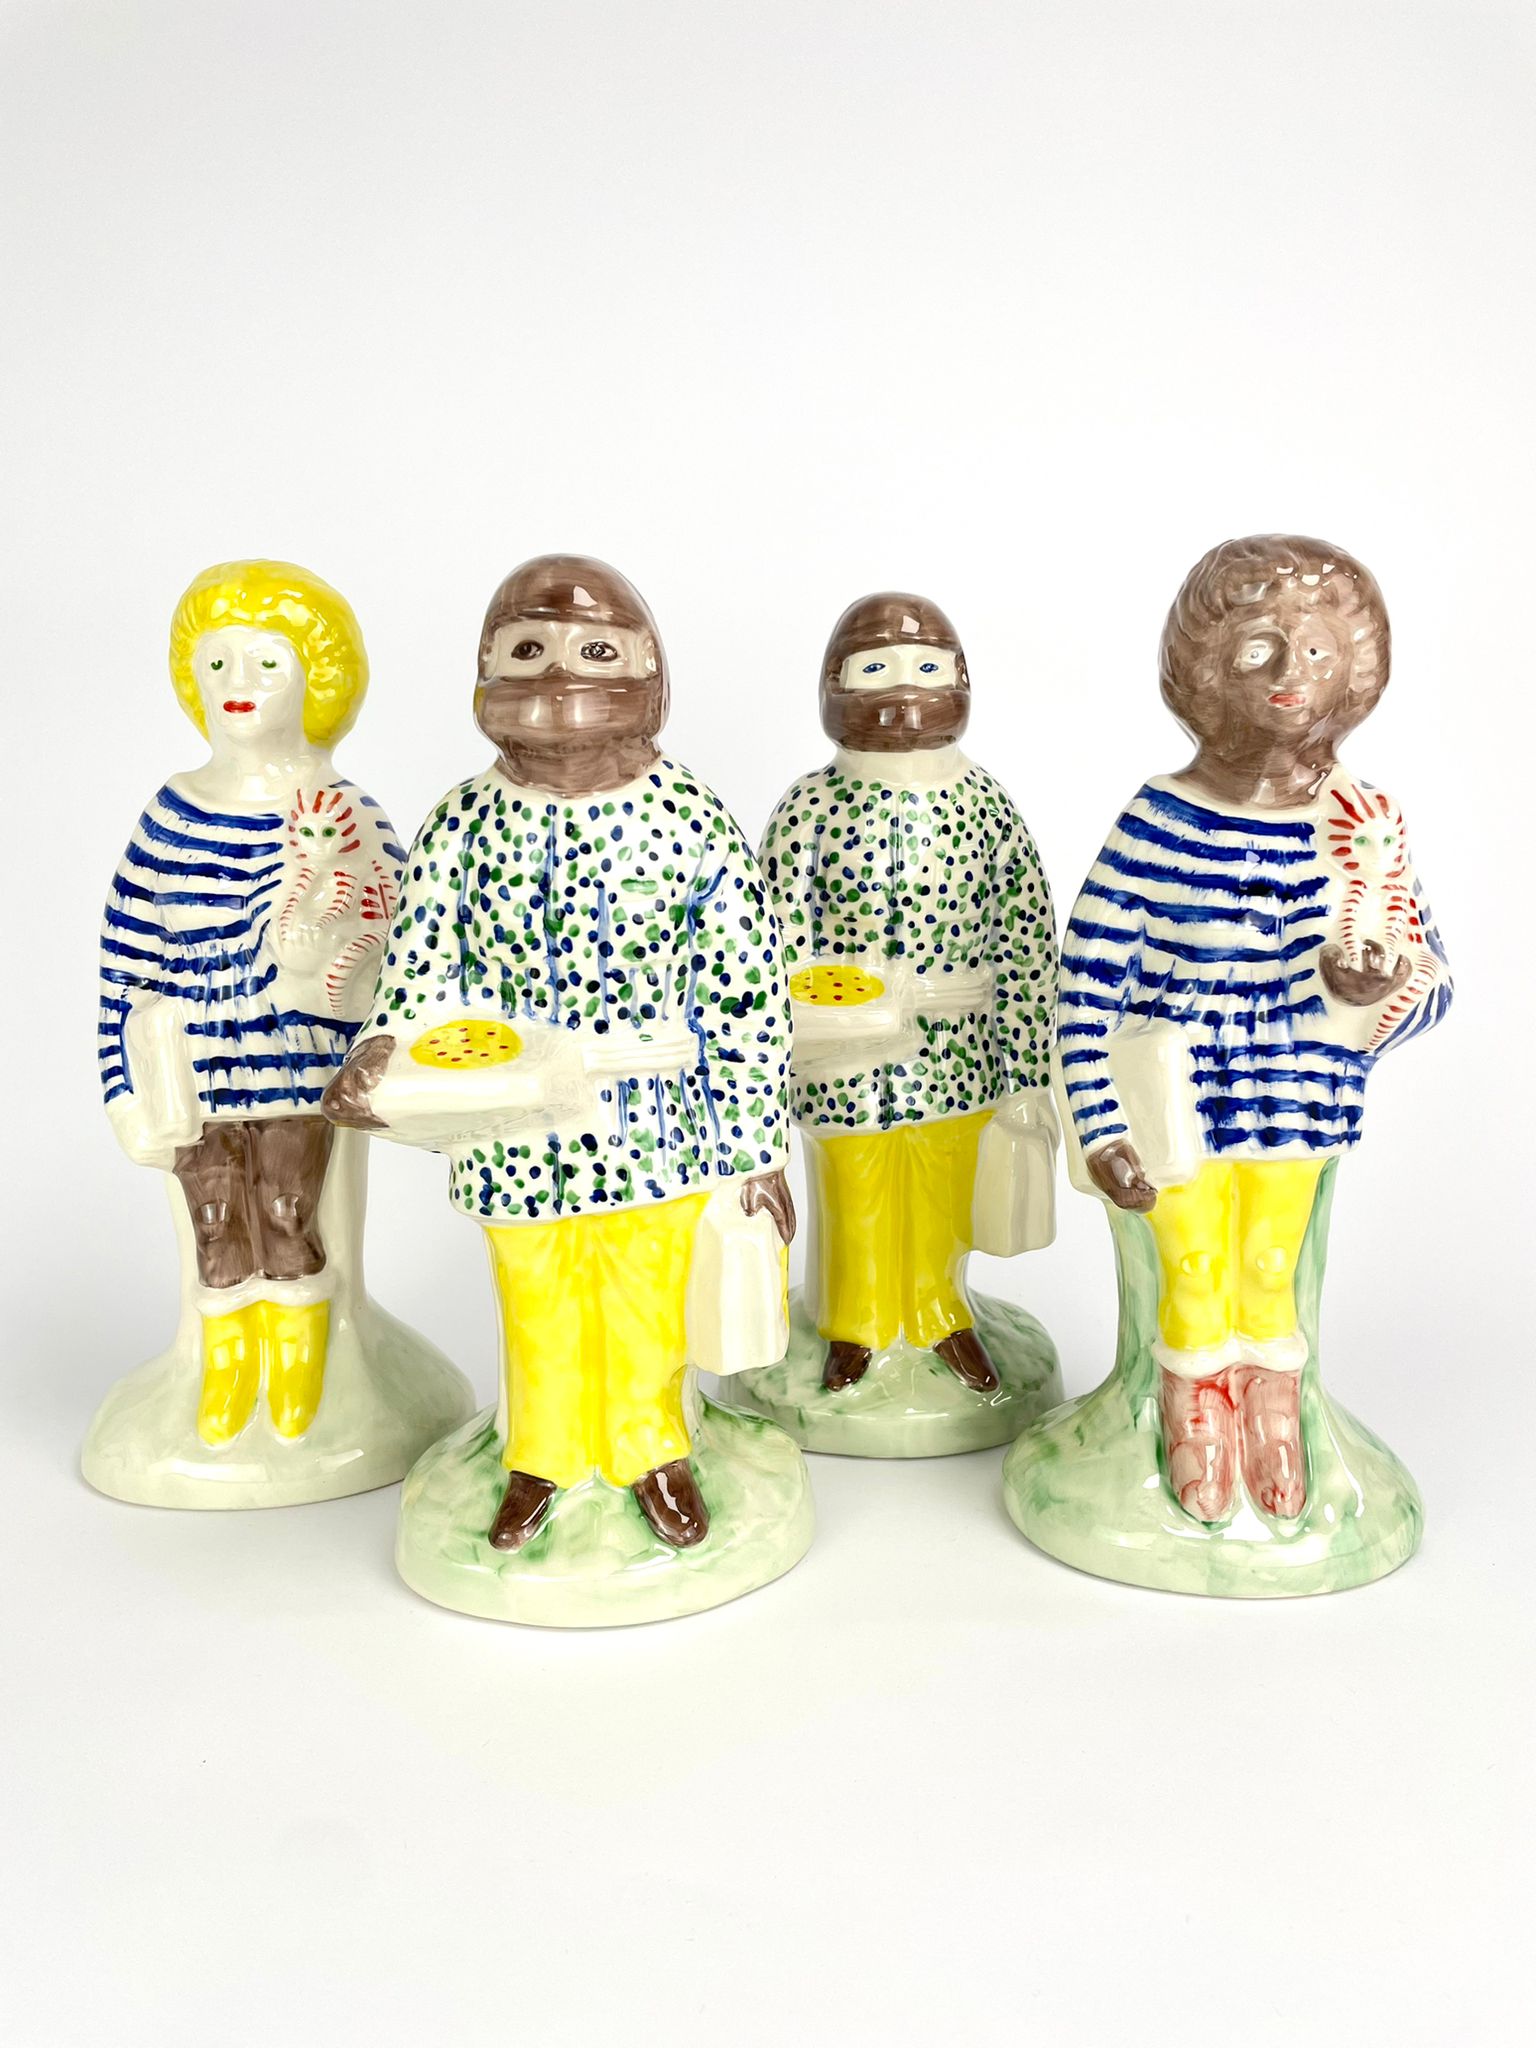 Grayson Perry Sculpture Set Keyworkers Homeworkers limited edition pottery